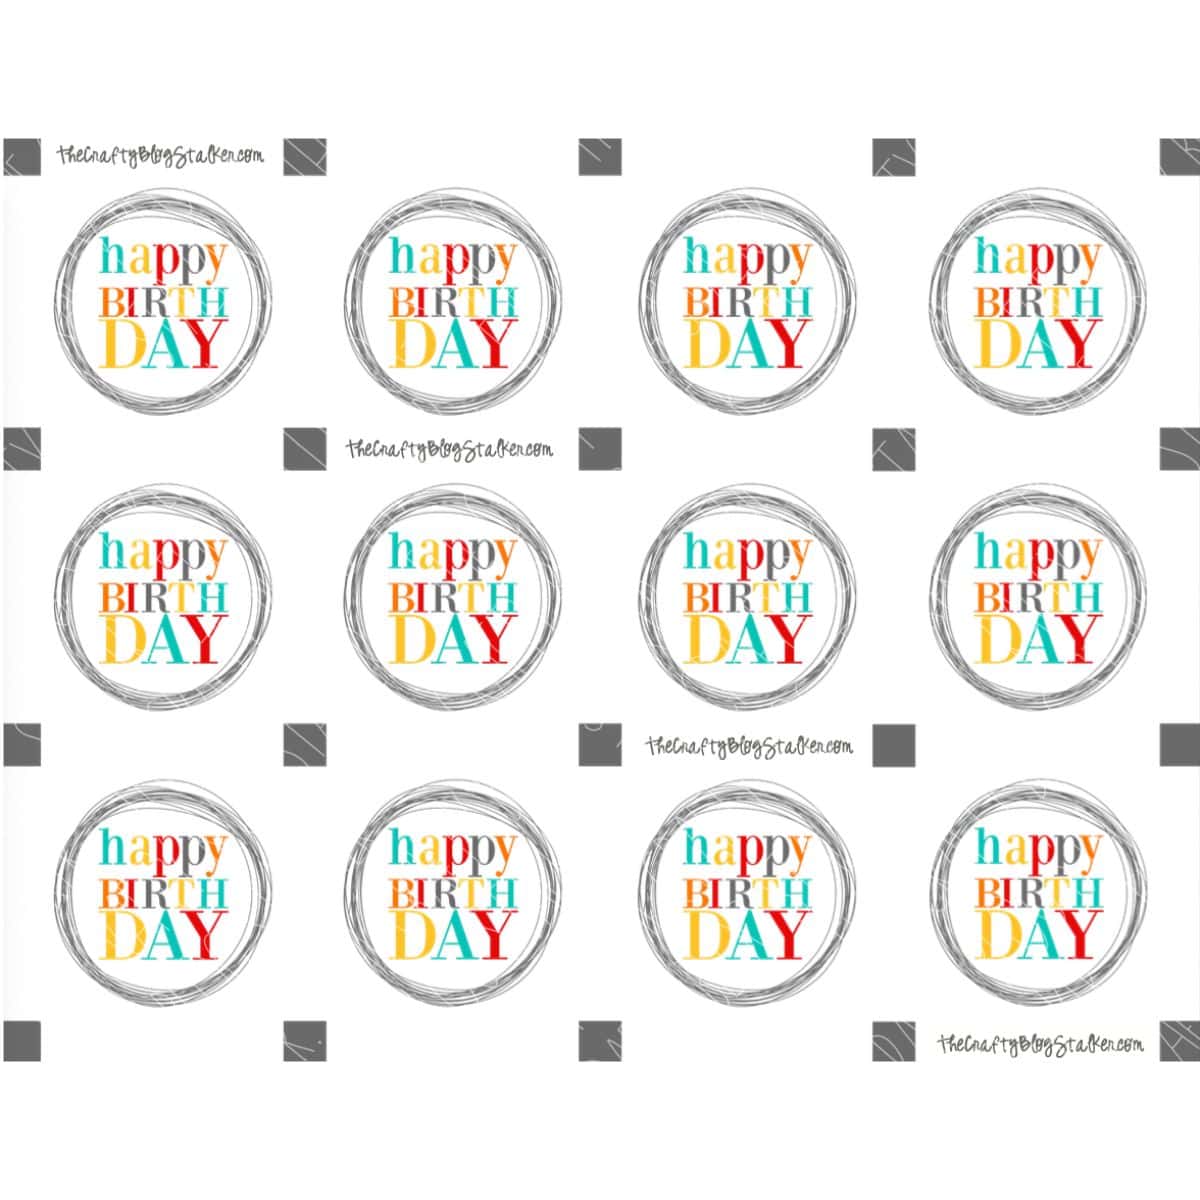 Happy Birthday Gift Tags Free Printable PDF	

			
		
	

		
			Free – Buy Now Checkout
							
					
						
							
						
						Added to cart